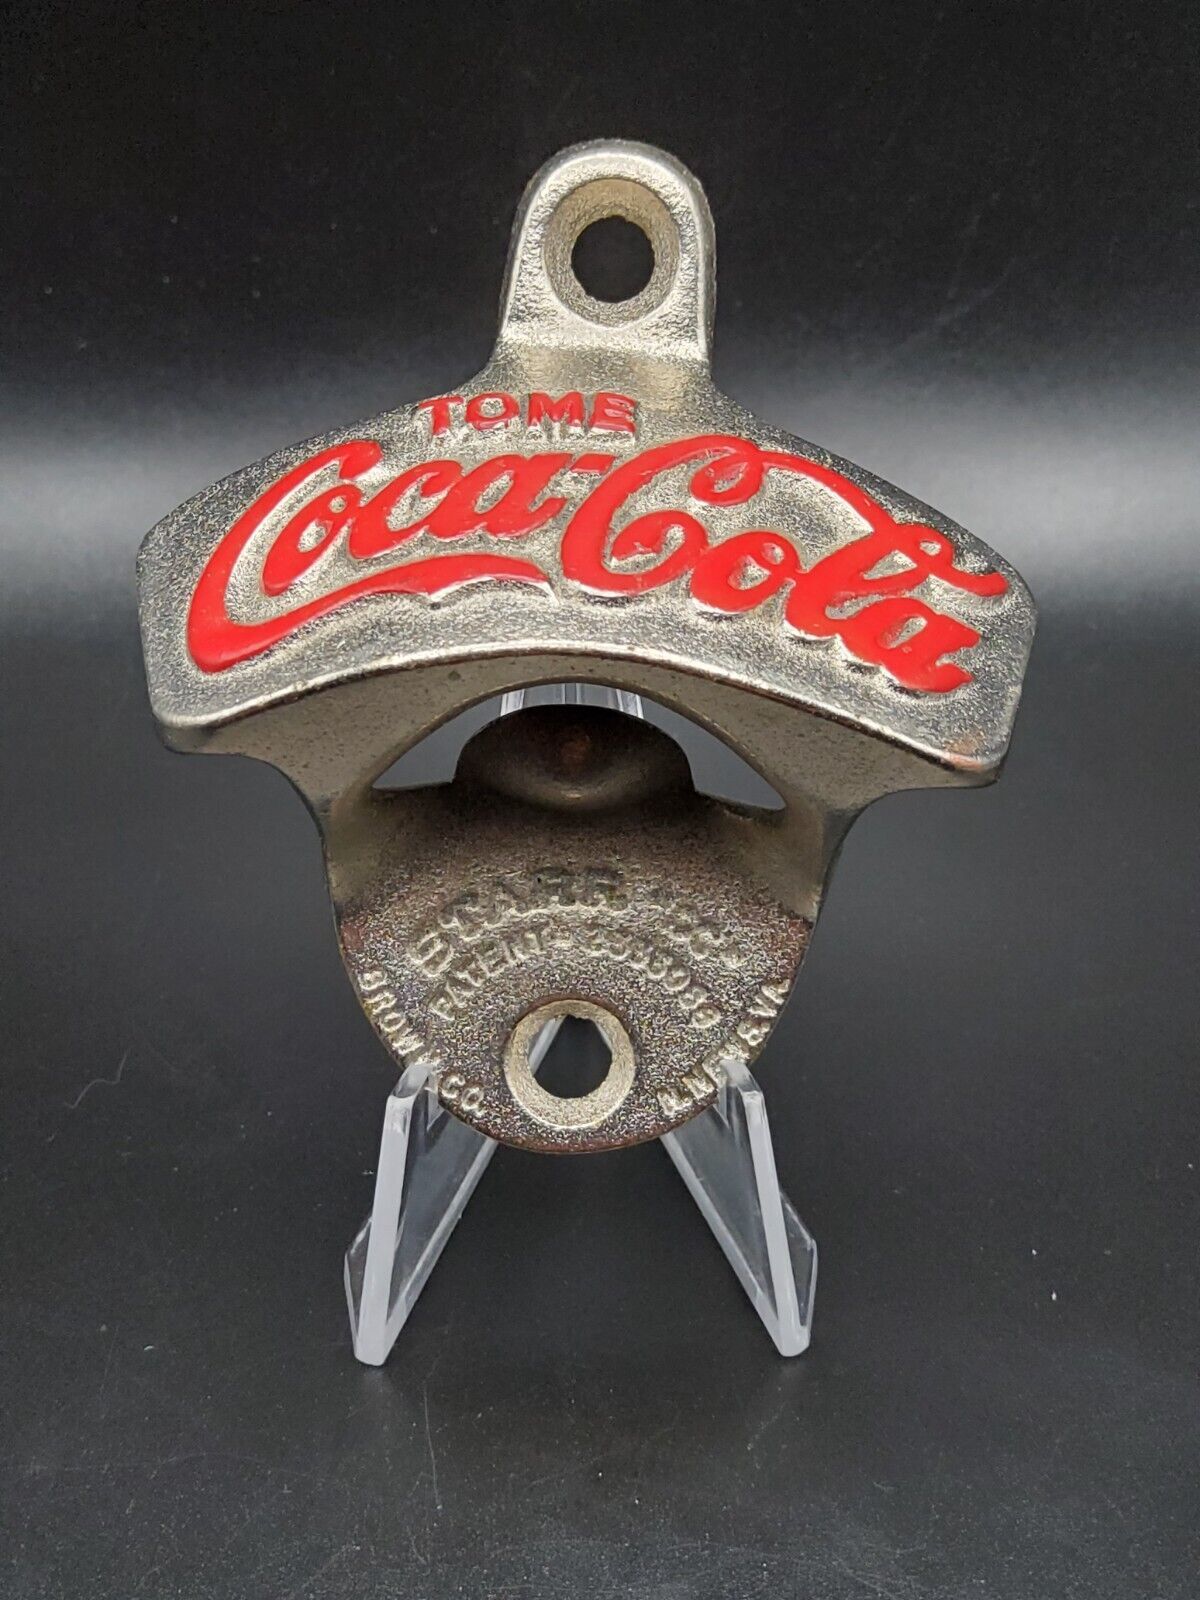 Starr-X Coca Cola Bottle Opener Spanish "TOME", Made in Germany ~ Rare - $55.78